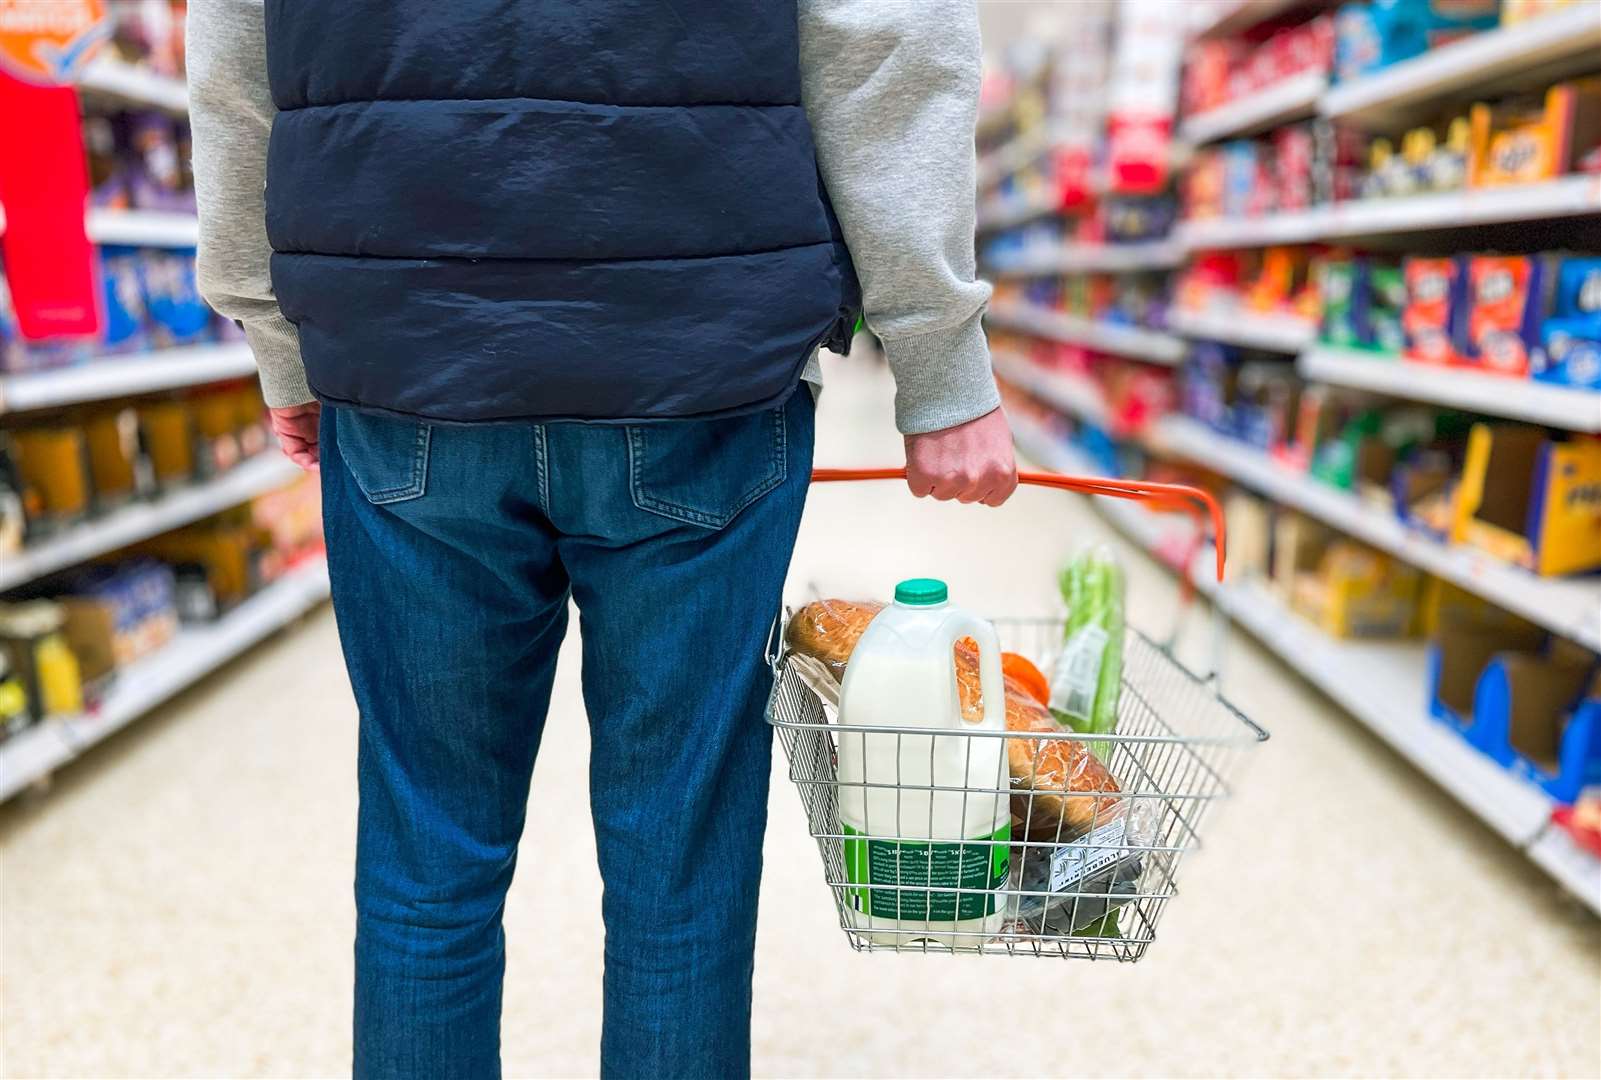 Signs in the aisles will alert shoppers to the recall. Image: Stock photo.